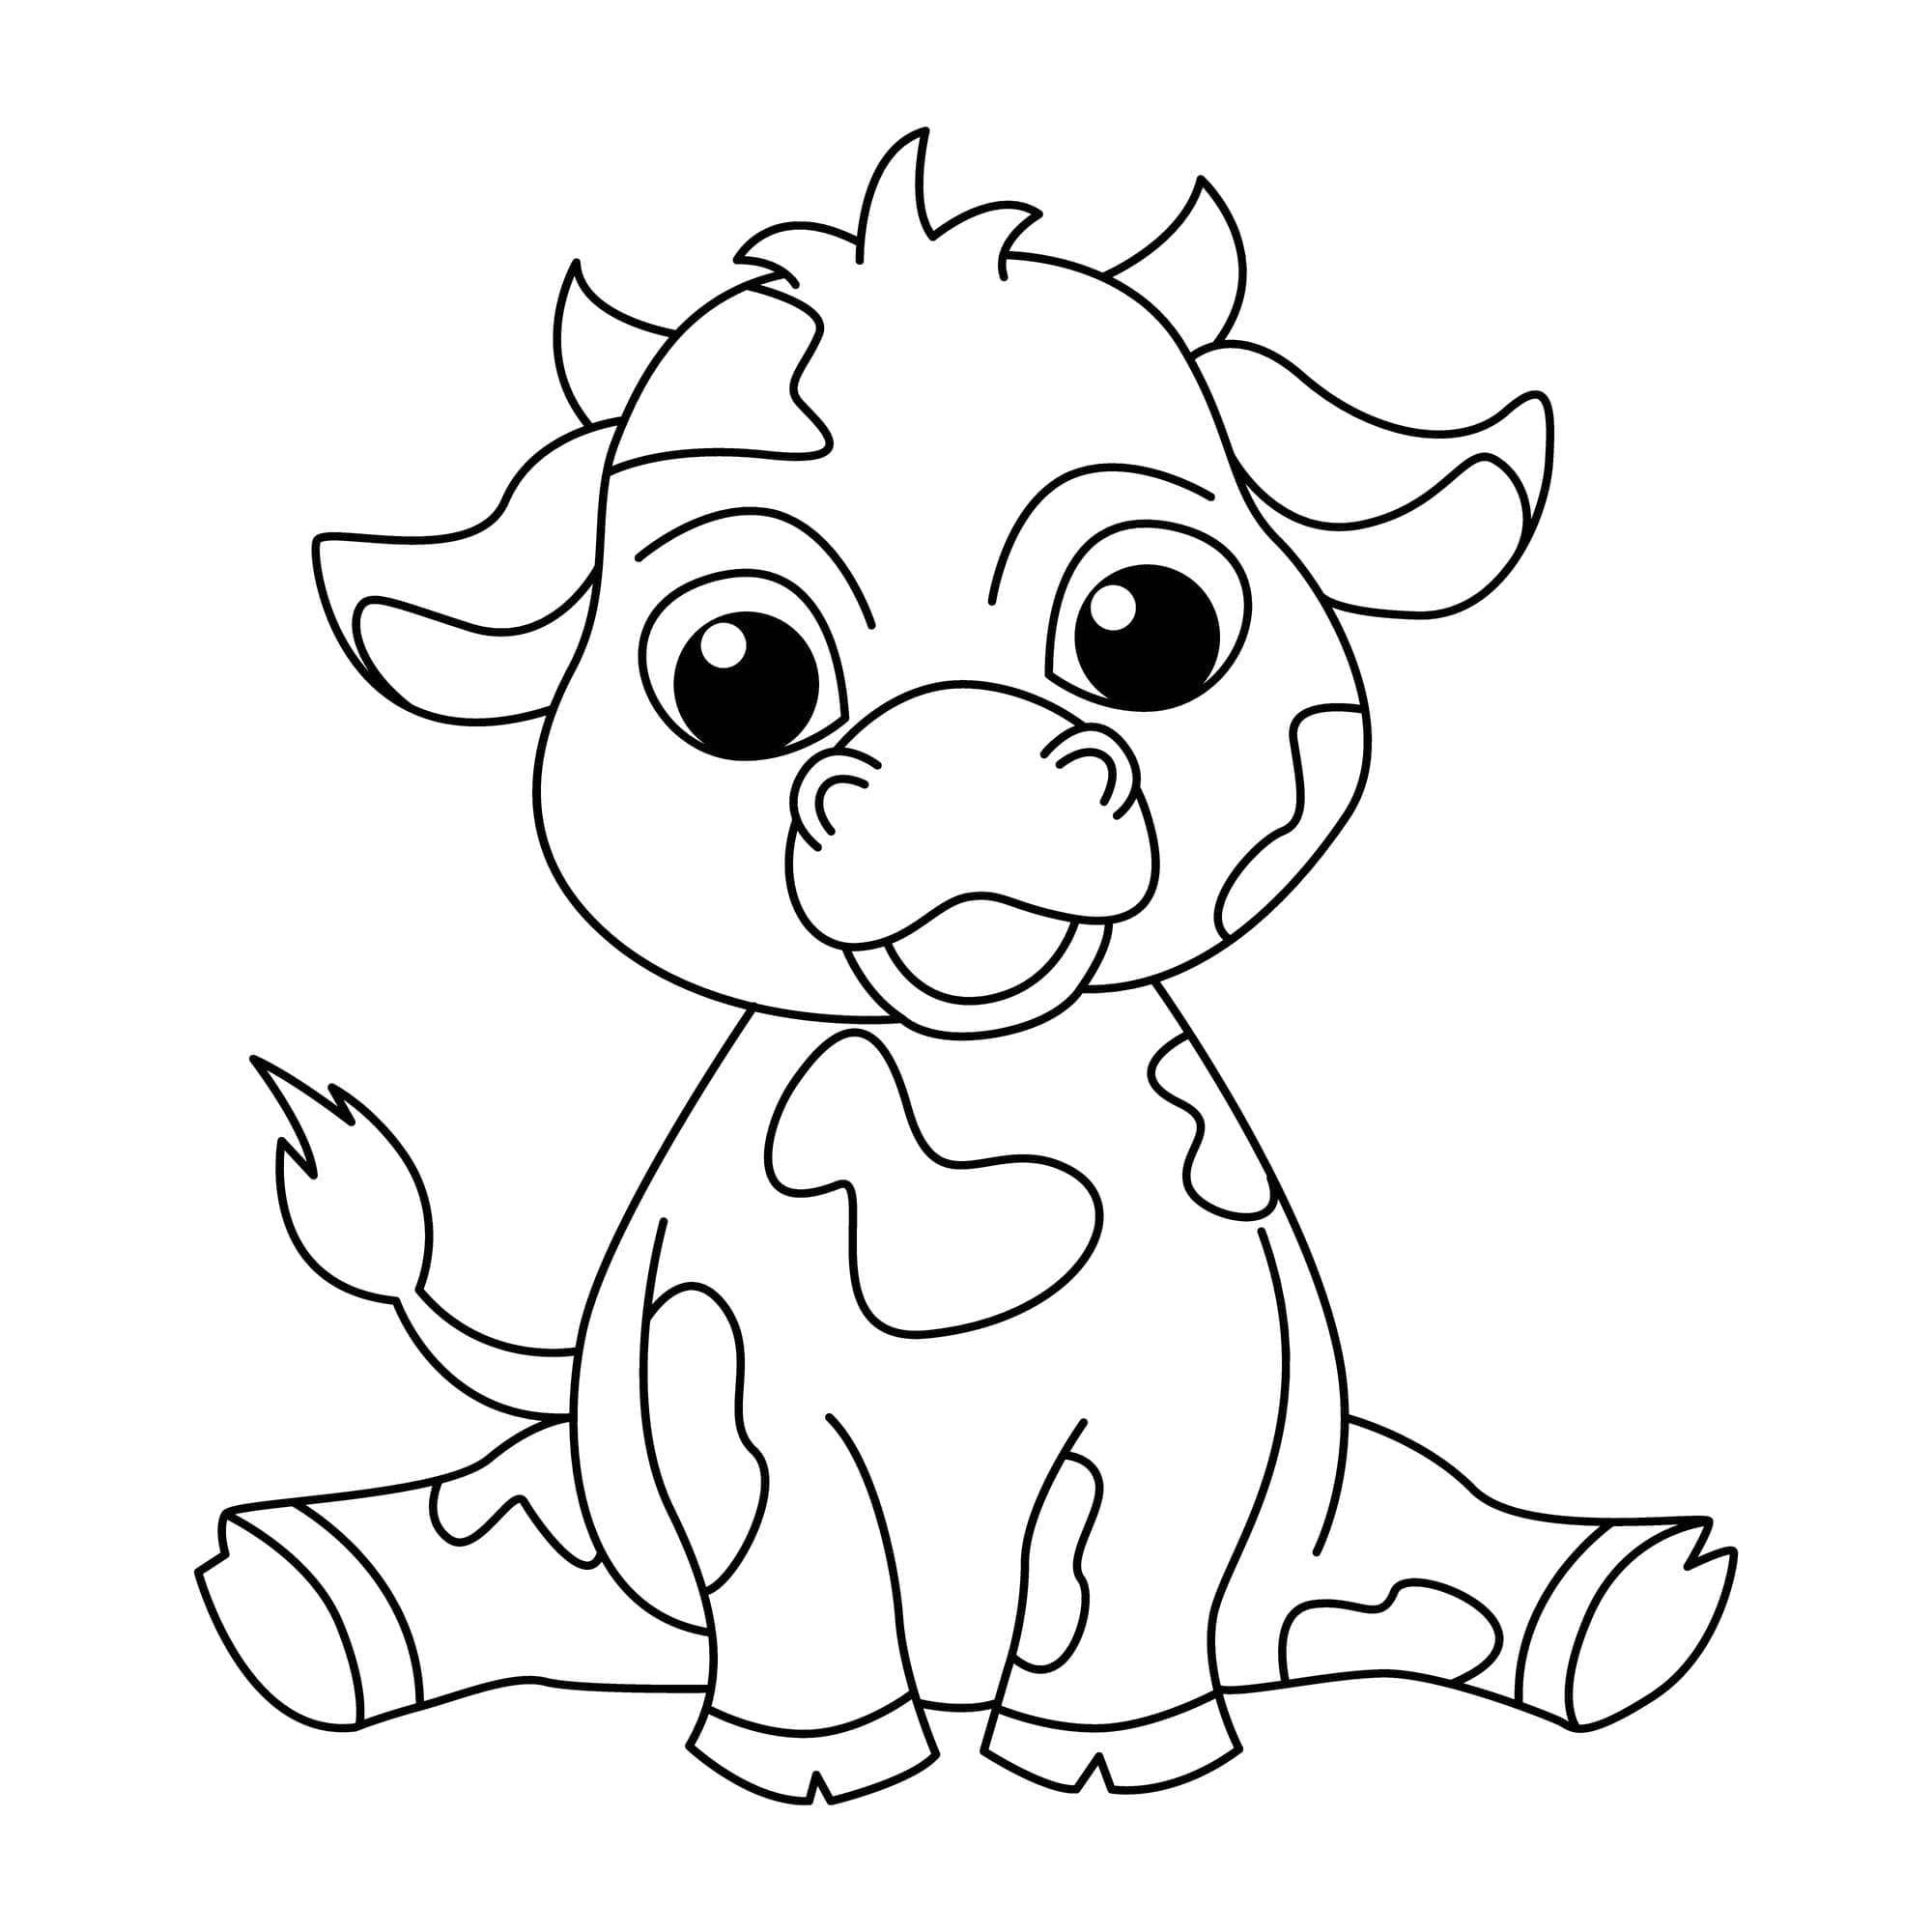 free-coloring-pages-for-3-year-olds